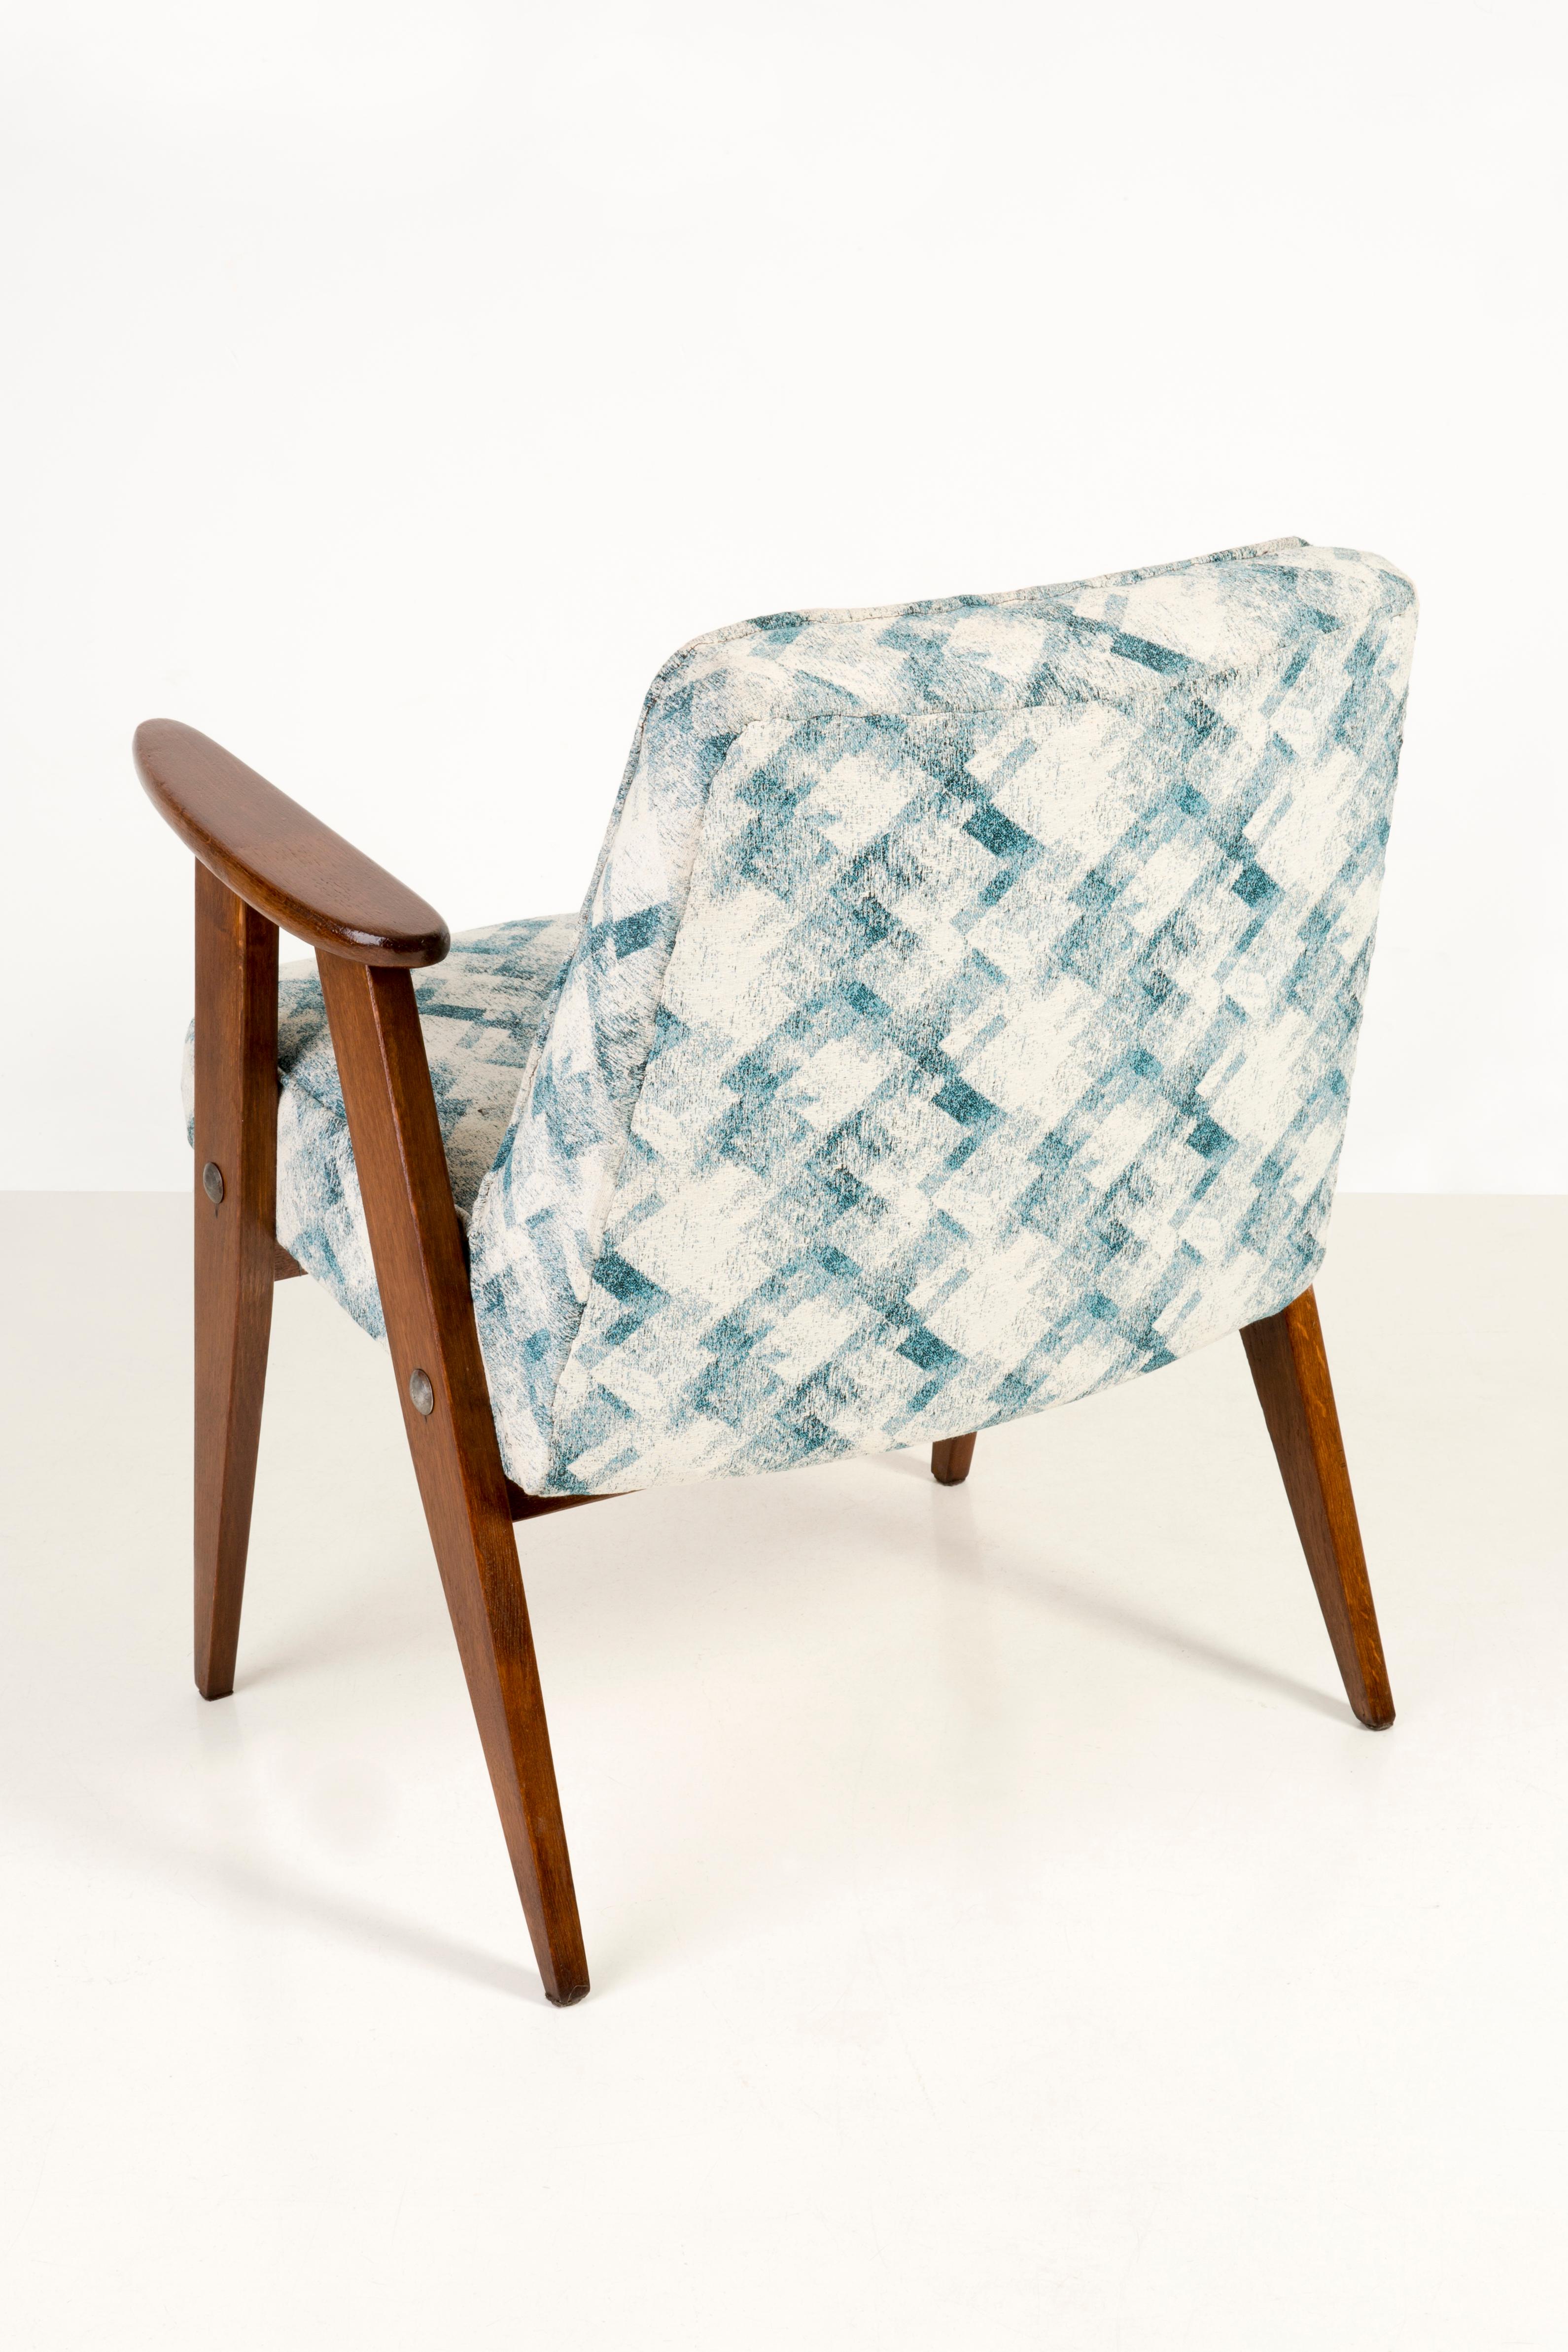 Textile Set of Two-Light Green Pattern 366 Armchair, Jozef Chierowski, 1960s For Sale